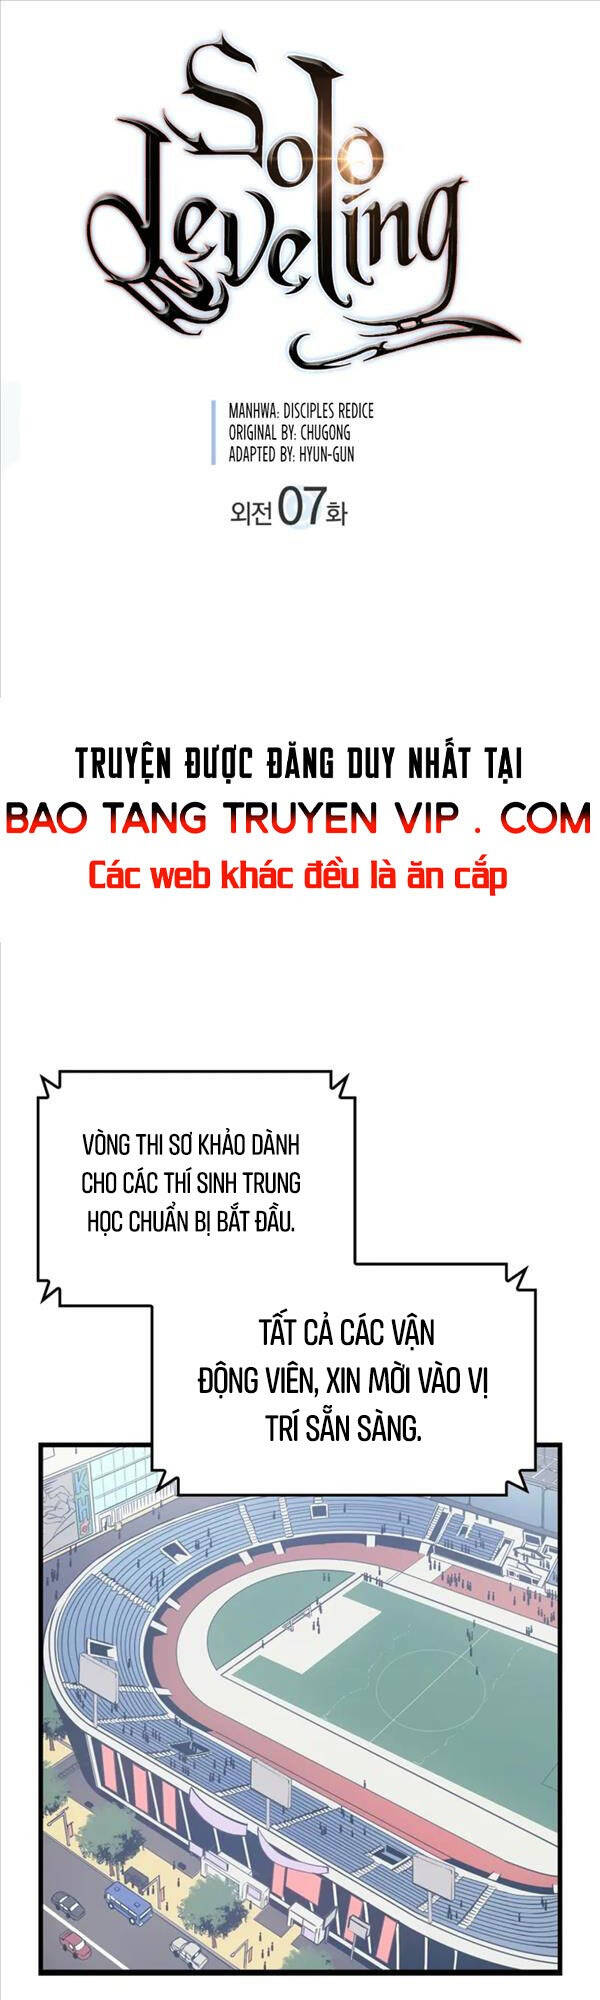 Truyện khủng - Solo Leveling Ss3